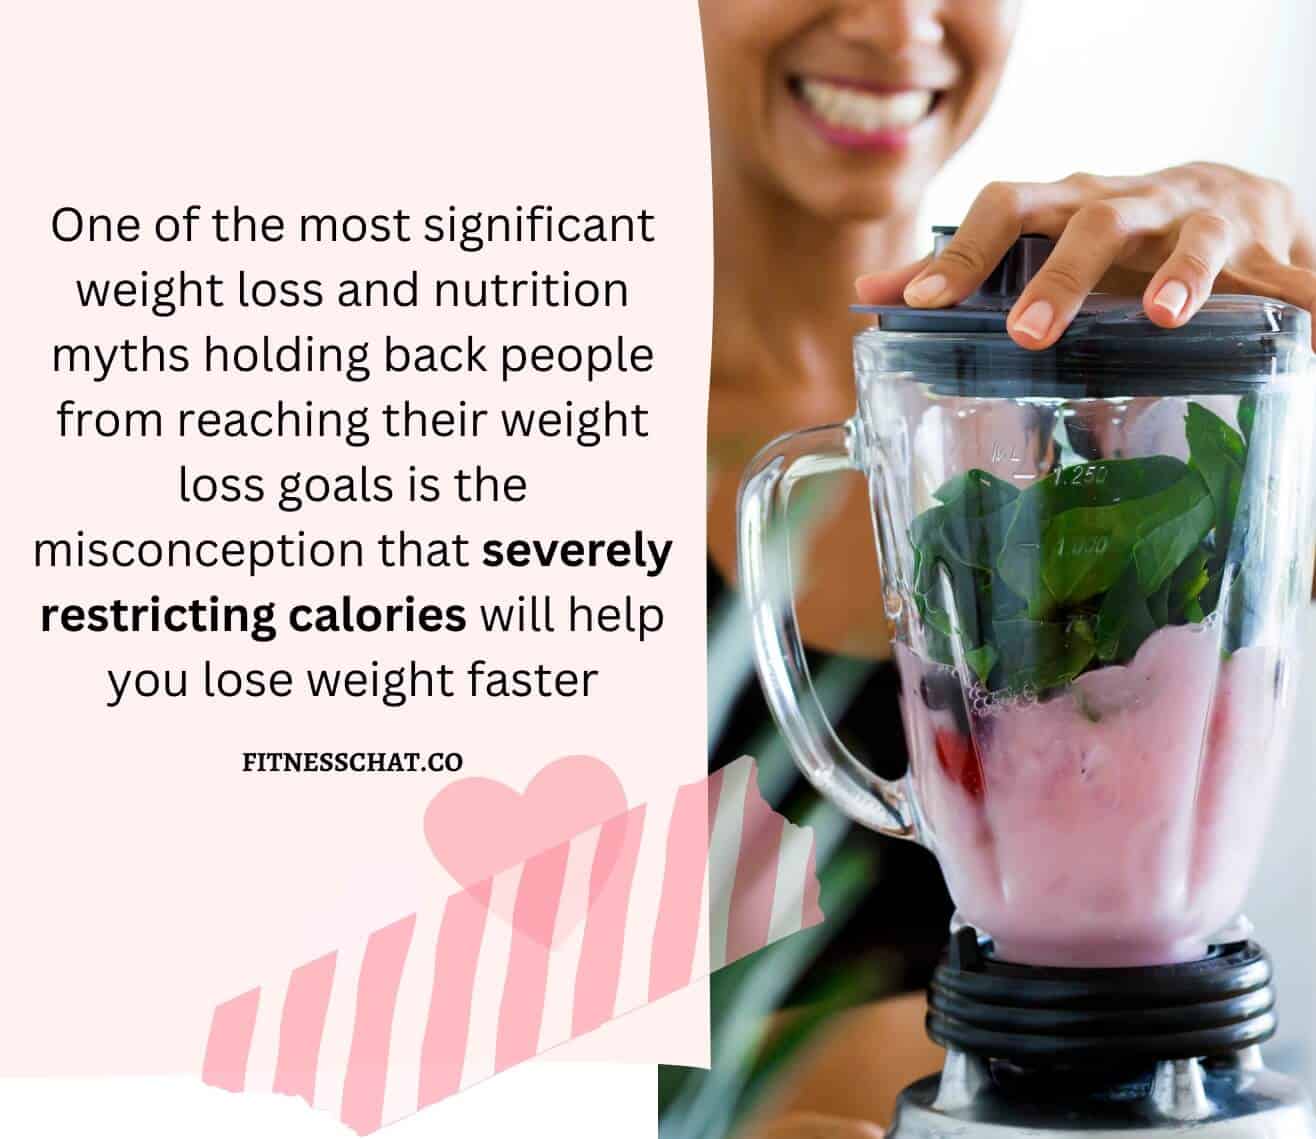 Weight loss myths and facts 